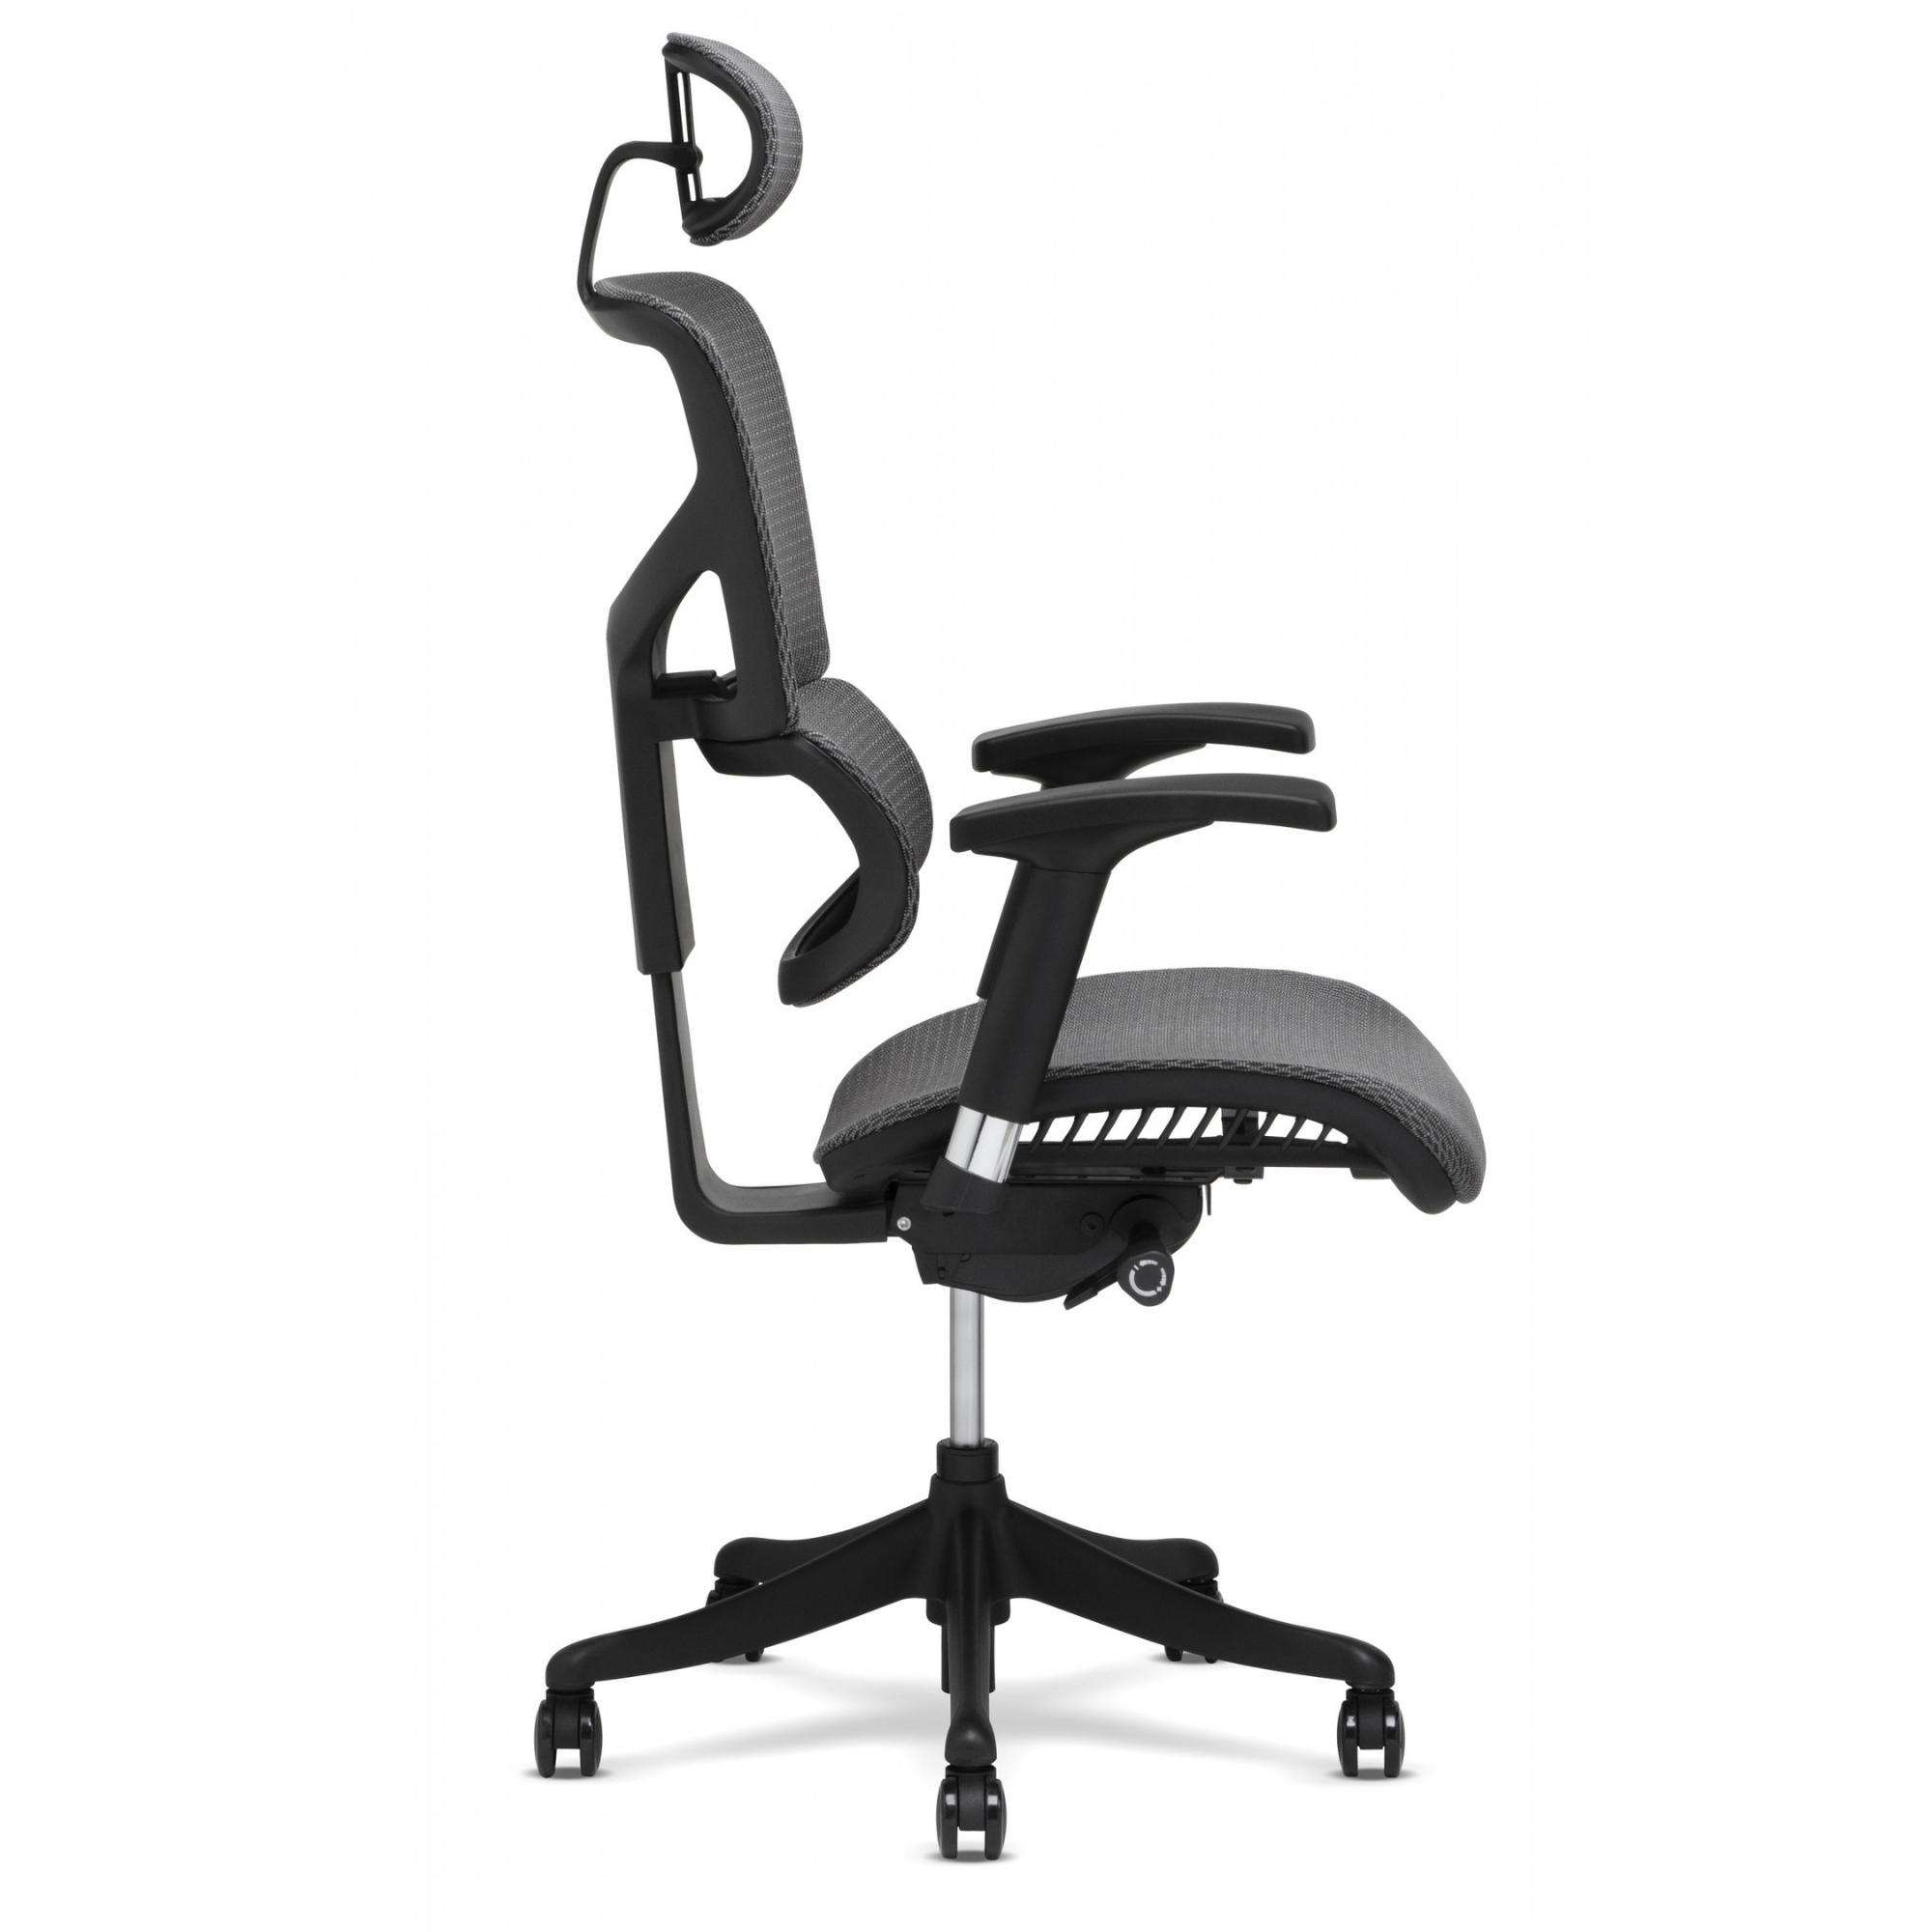 https://www.markdowns.com/wp-content/uploads/2022/03/X1-X-Chair-3.png